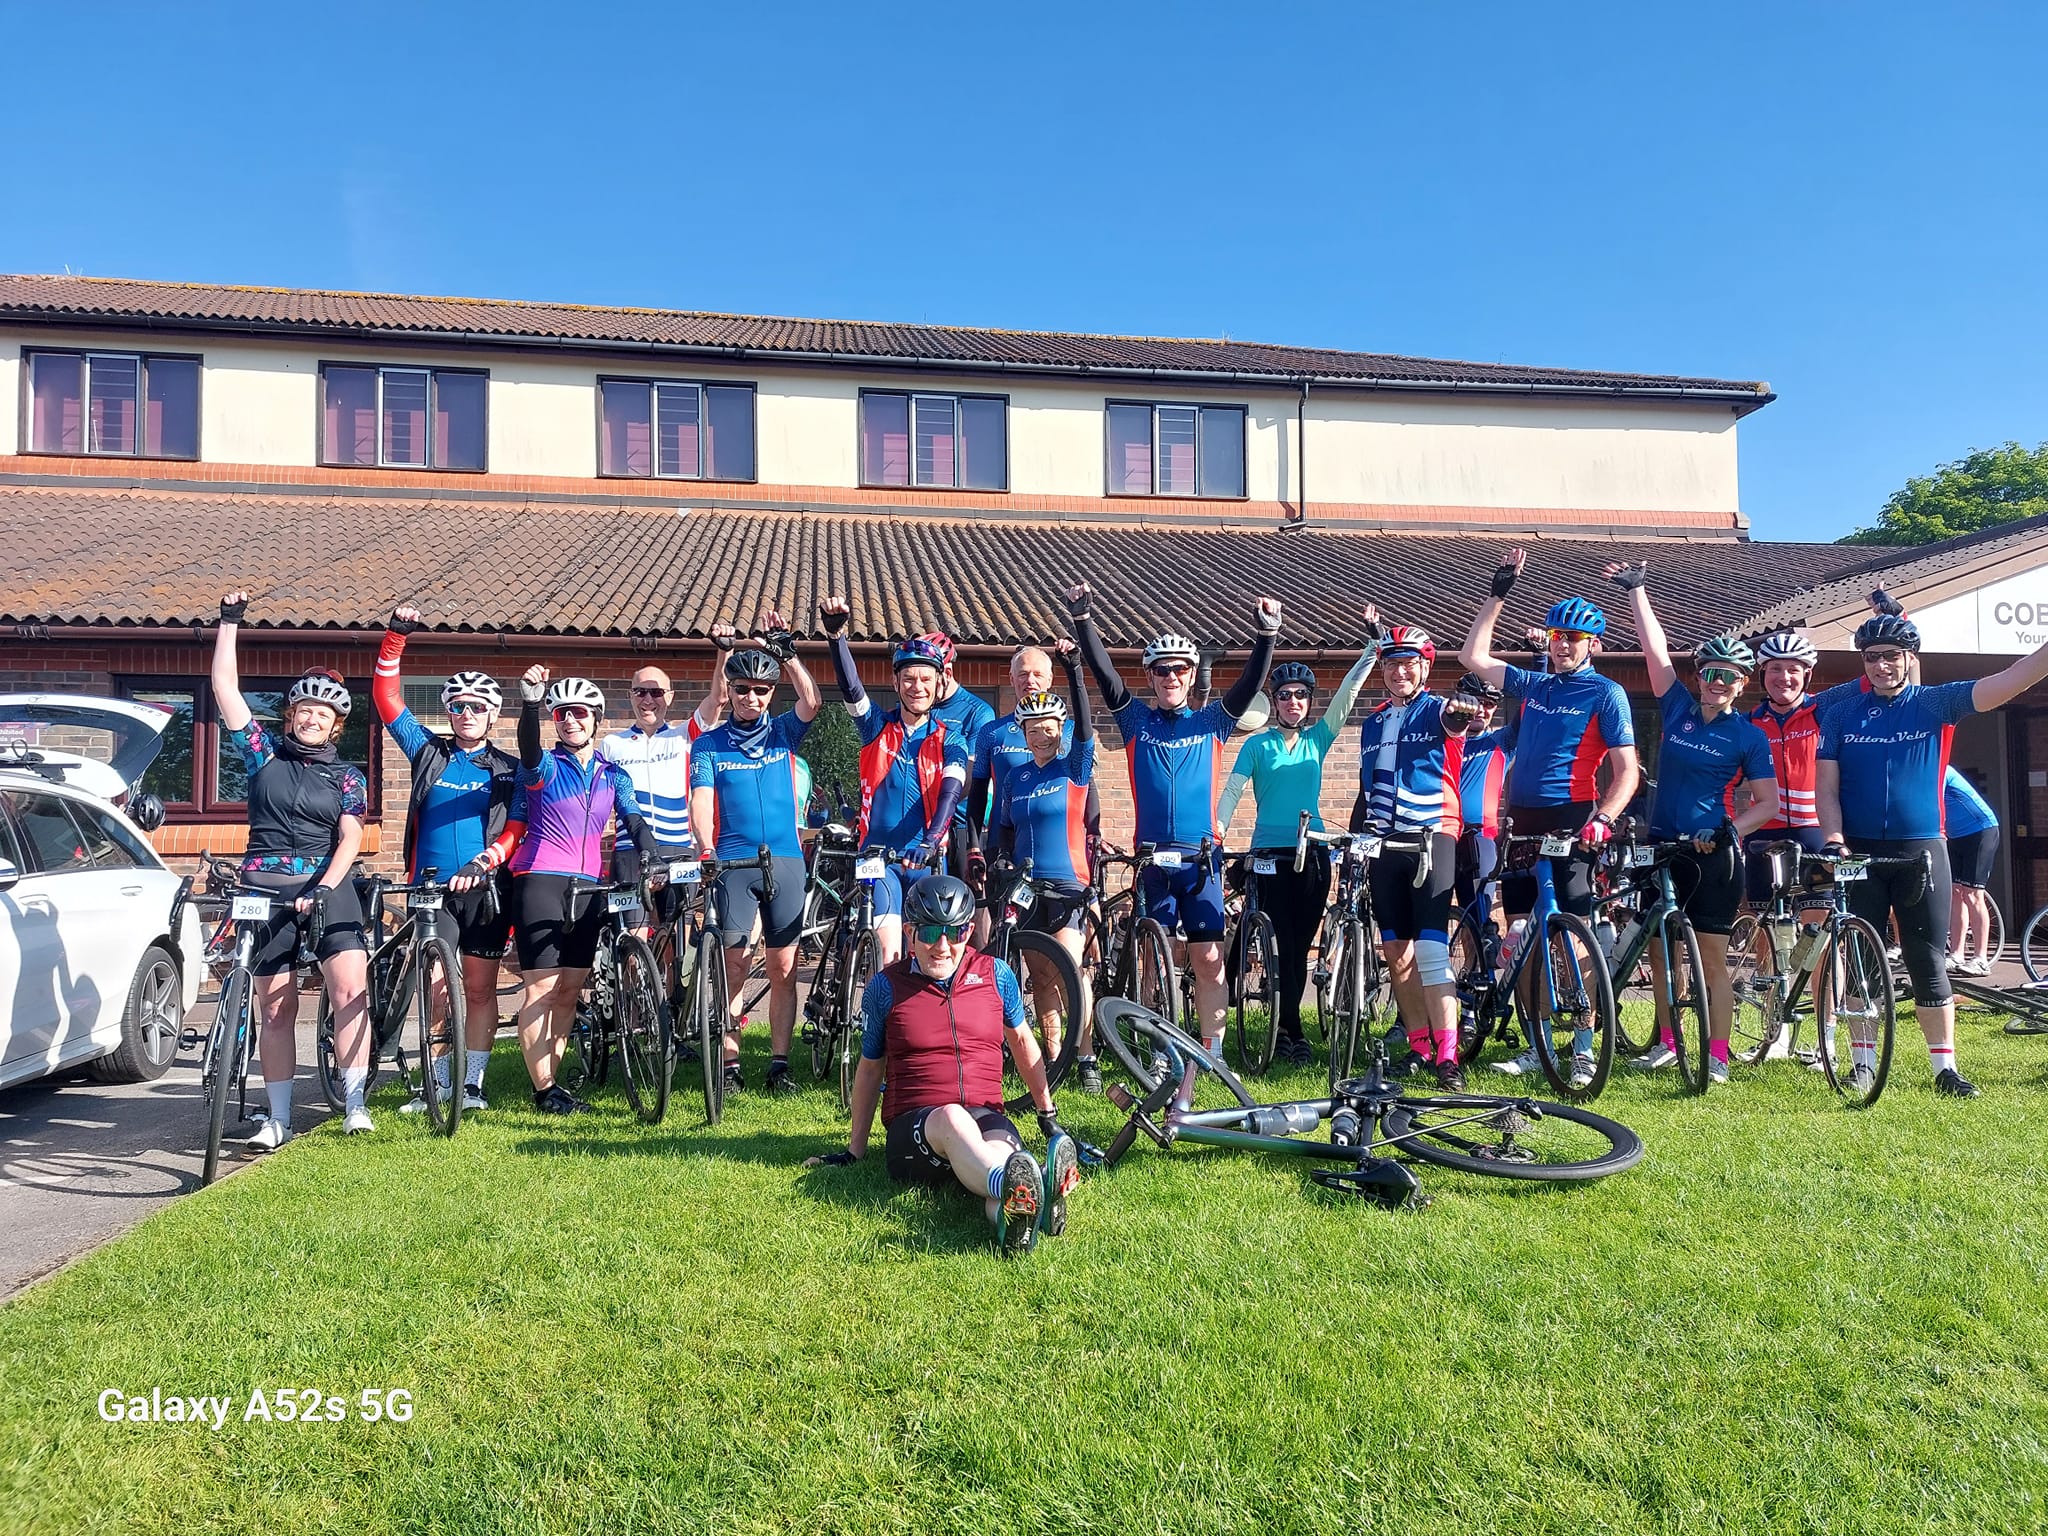 So You Want to Ride a 100-Mile Ride/Sportive? This Guide Will Help You Make It a Success